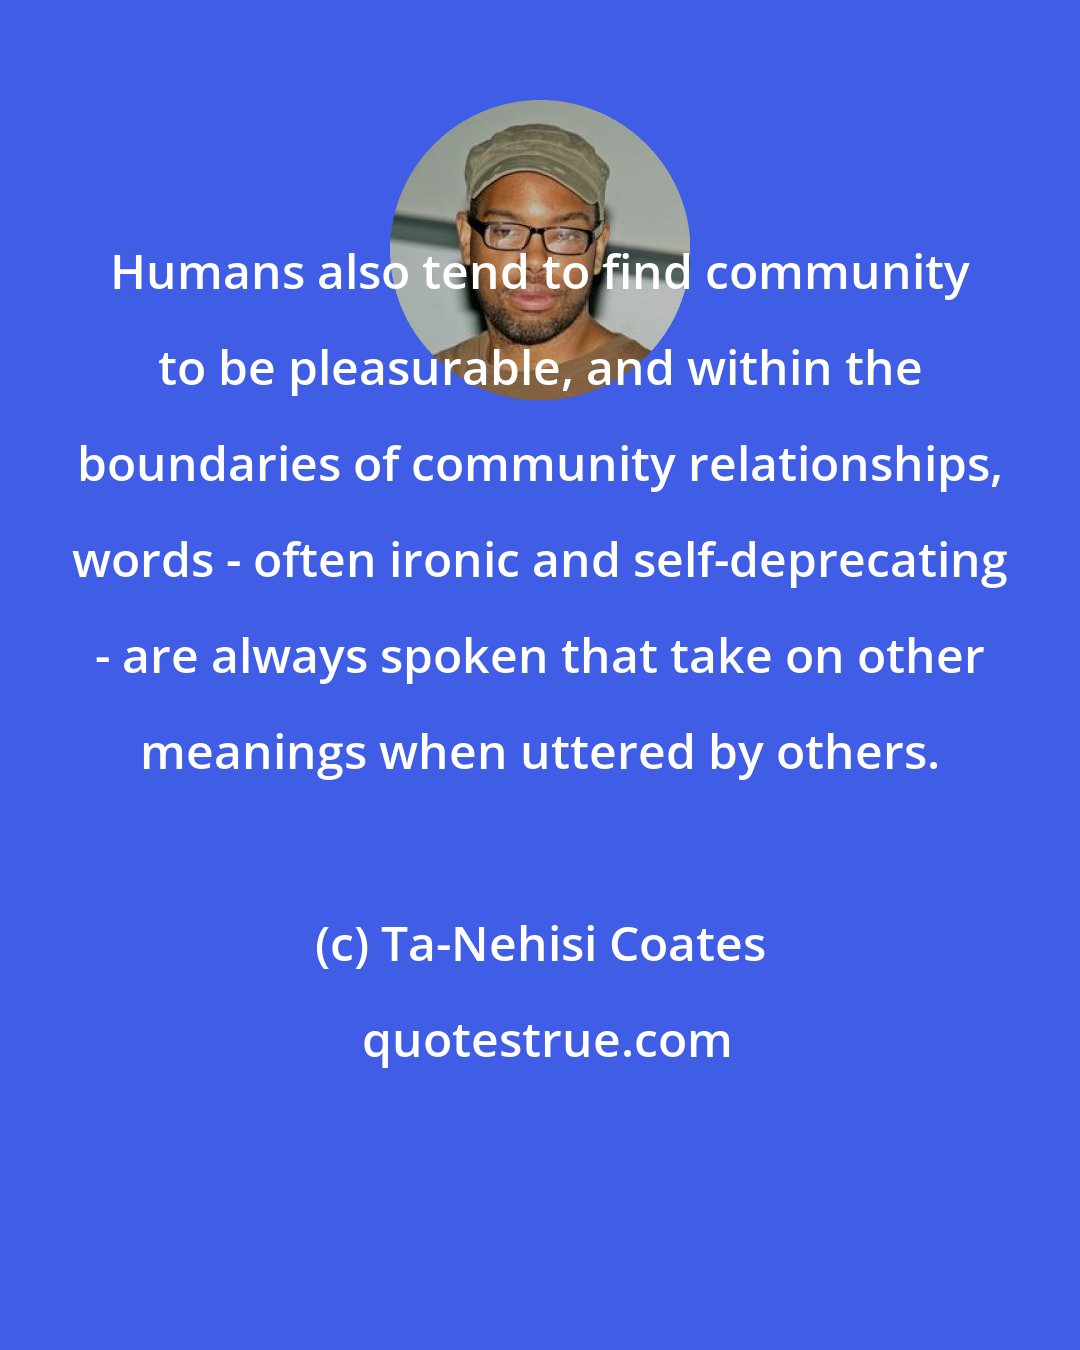 Ta-Nehisi Coates: Humans also tend to find community to be pleasurable, and within the boundaries of community relationships, words - often ironic and self-deprecating - are always spoken that take on other meanings when uttered by others.